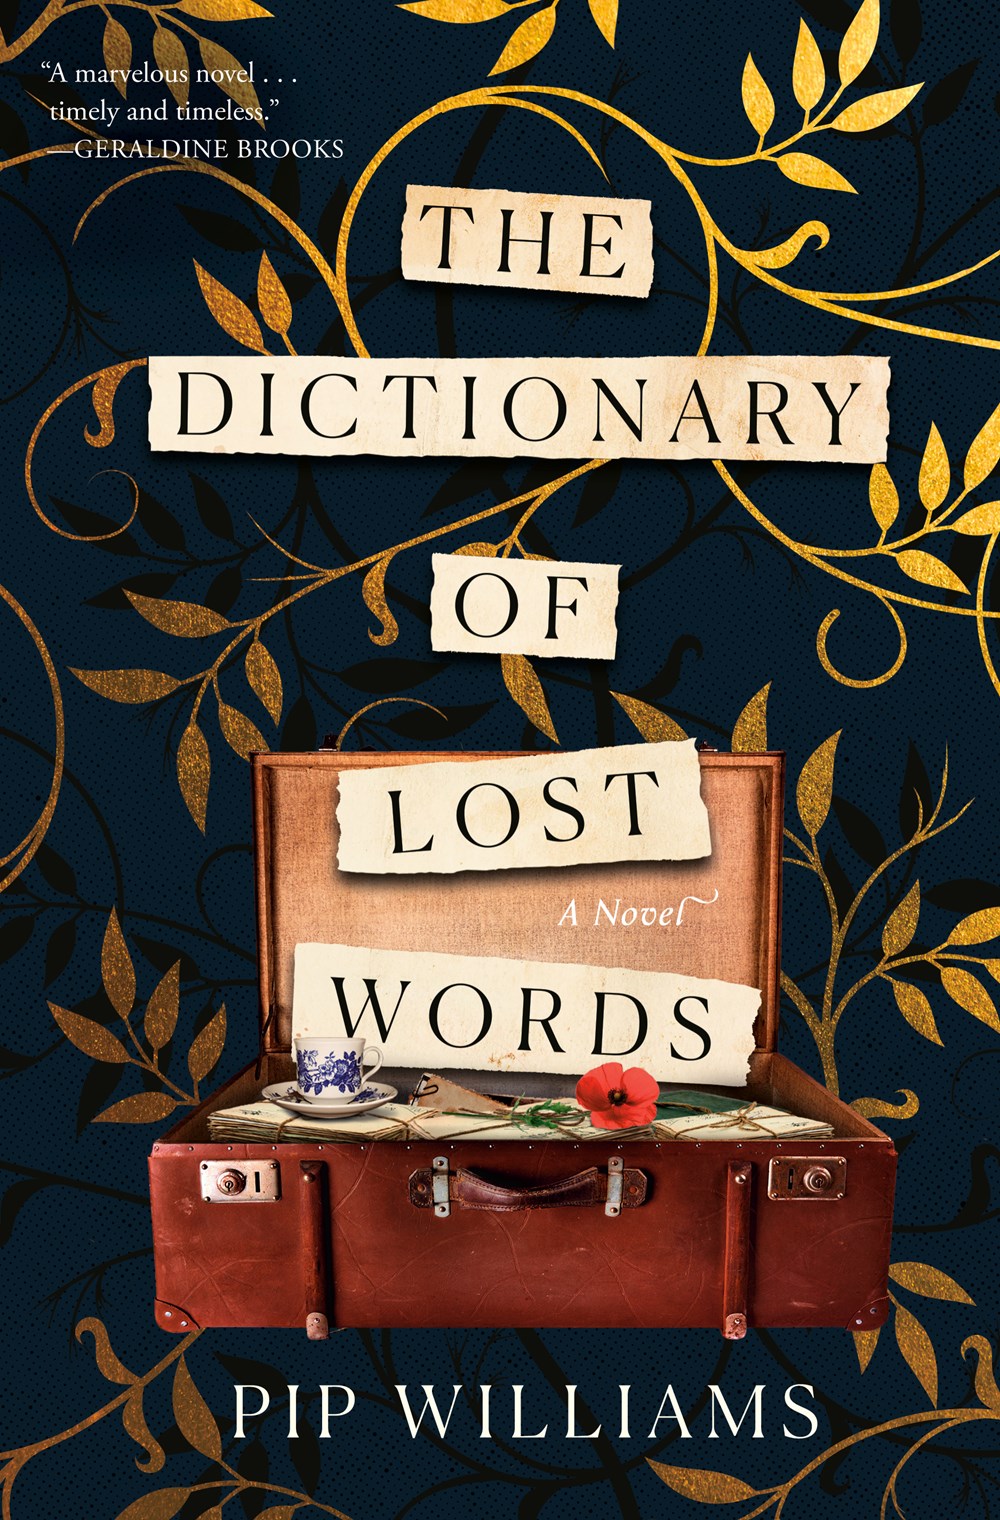 Reese’s May Pick Is ‘The Dictionary of Lost Words’ by Pip Williams | Book Pulse